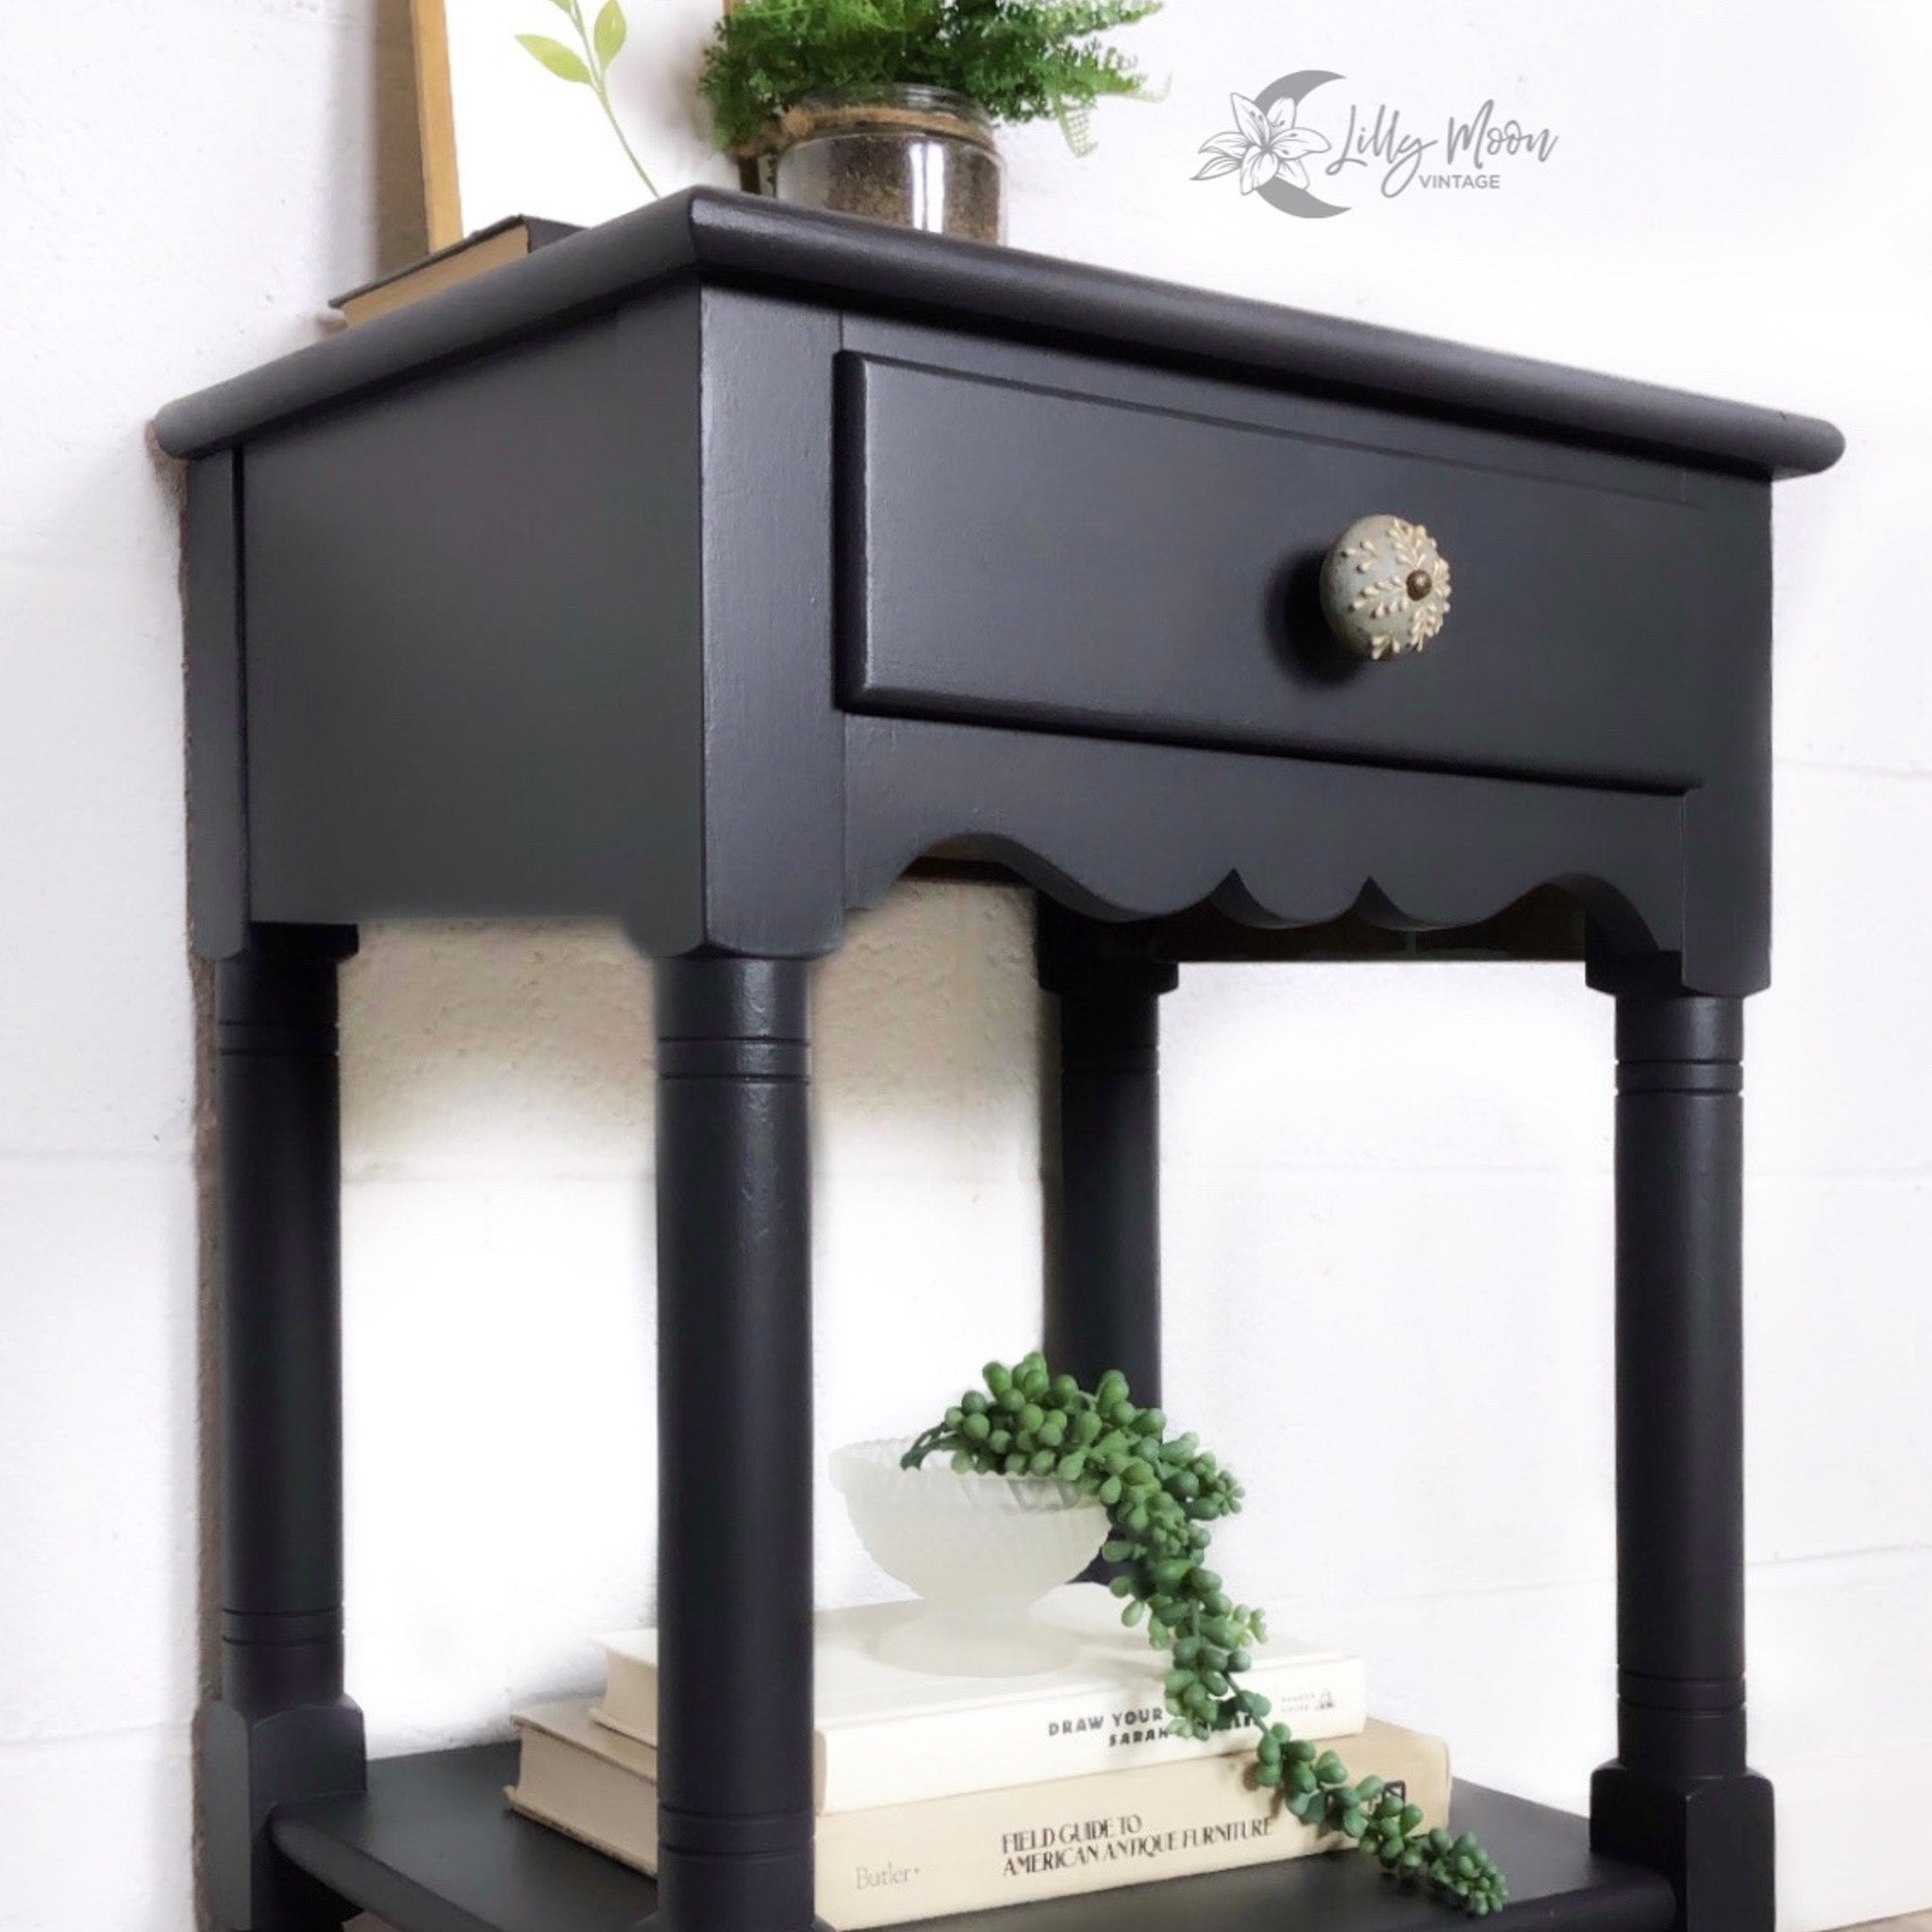 A vintage end table refurbished by Lilly Moon Vintage is painted in Dixie Belle's Midnight Sky chalk mineral paint.